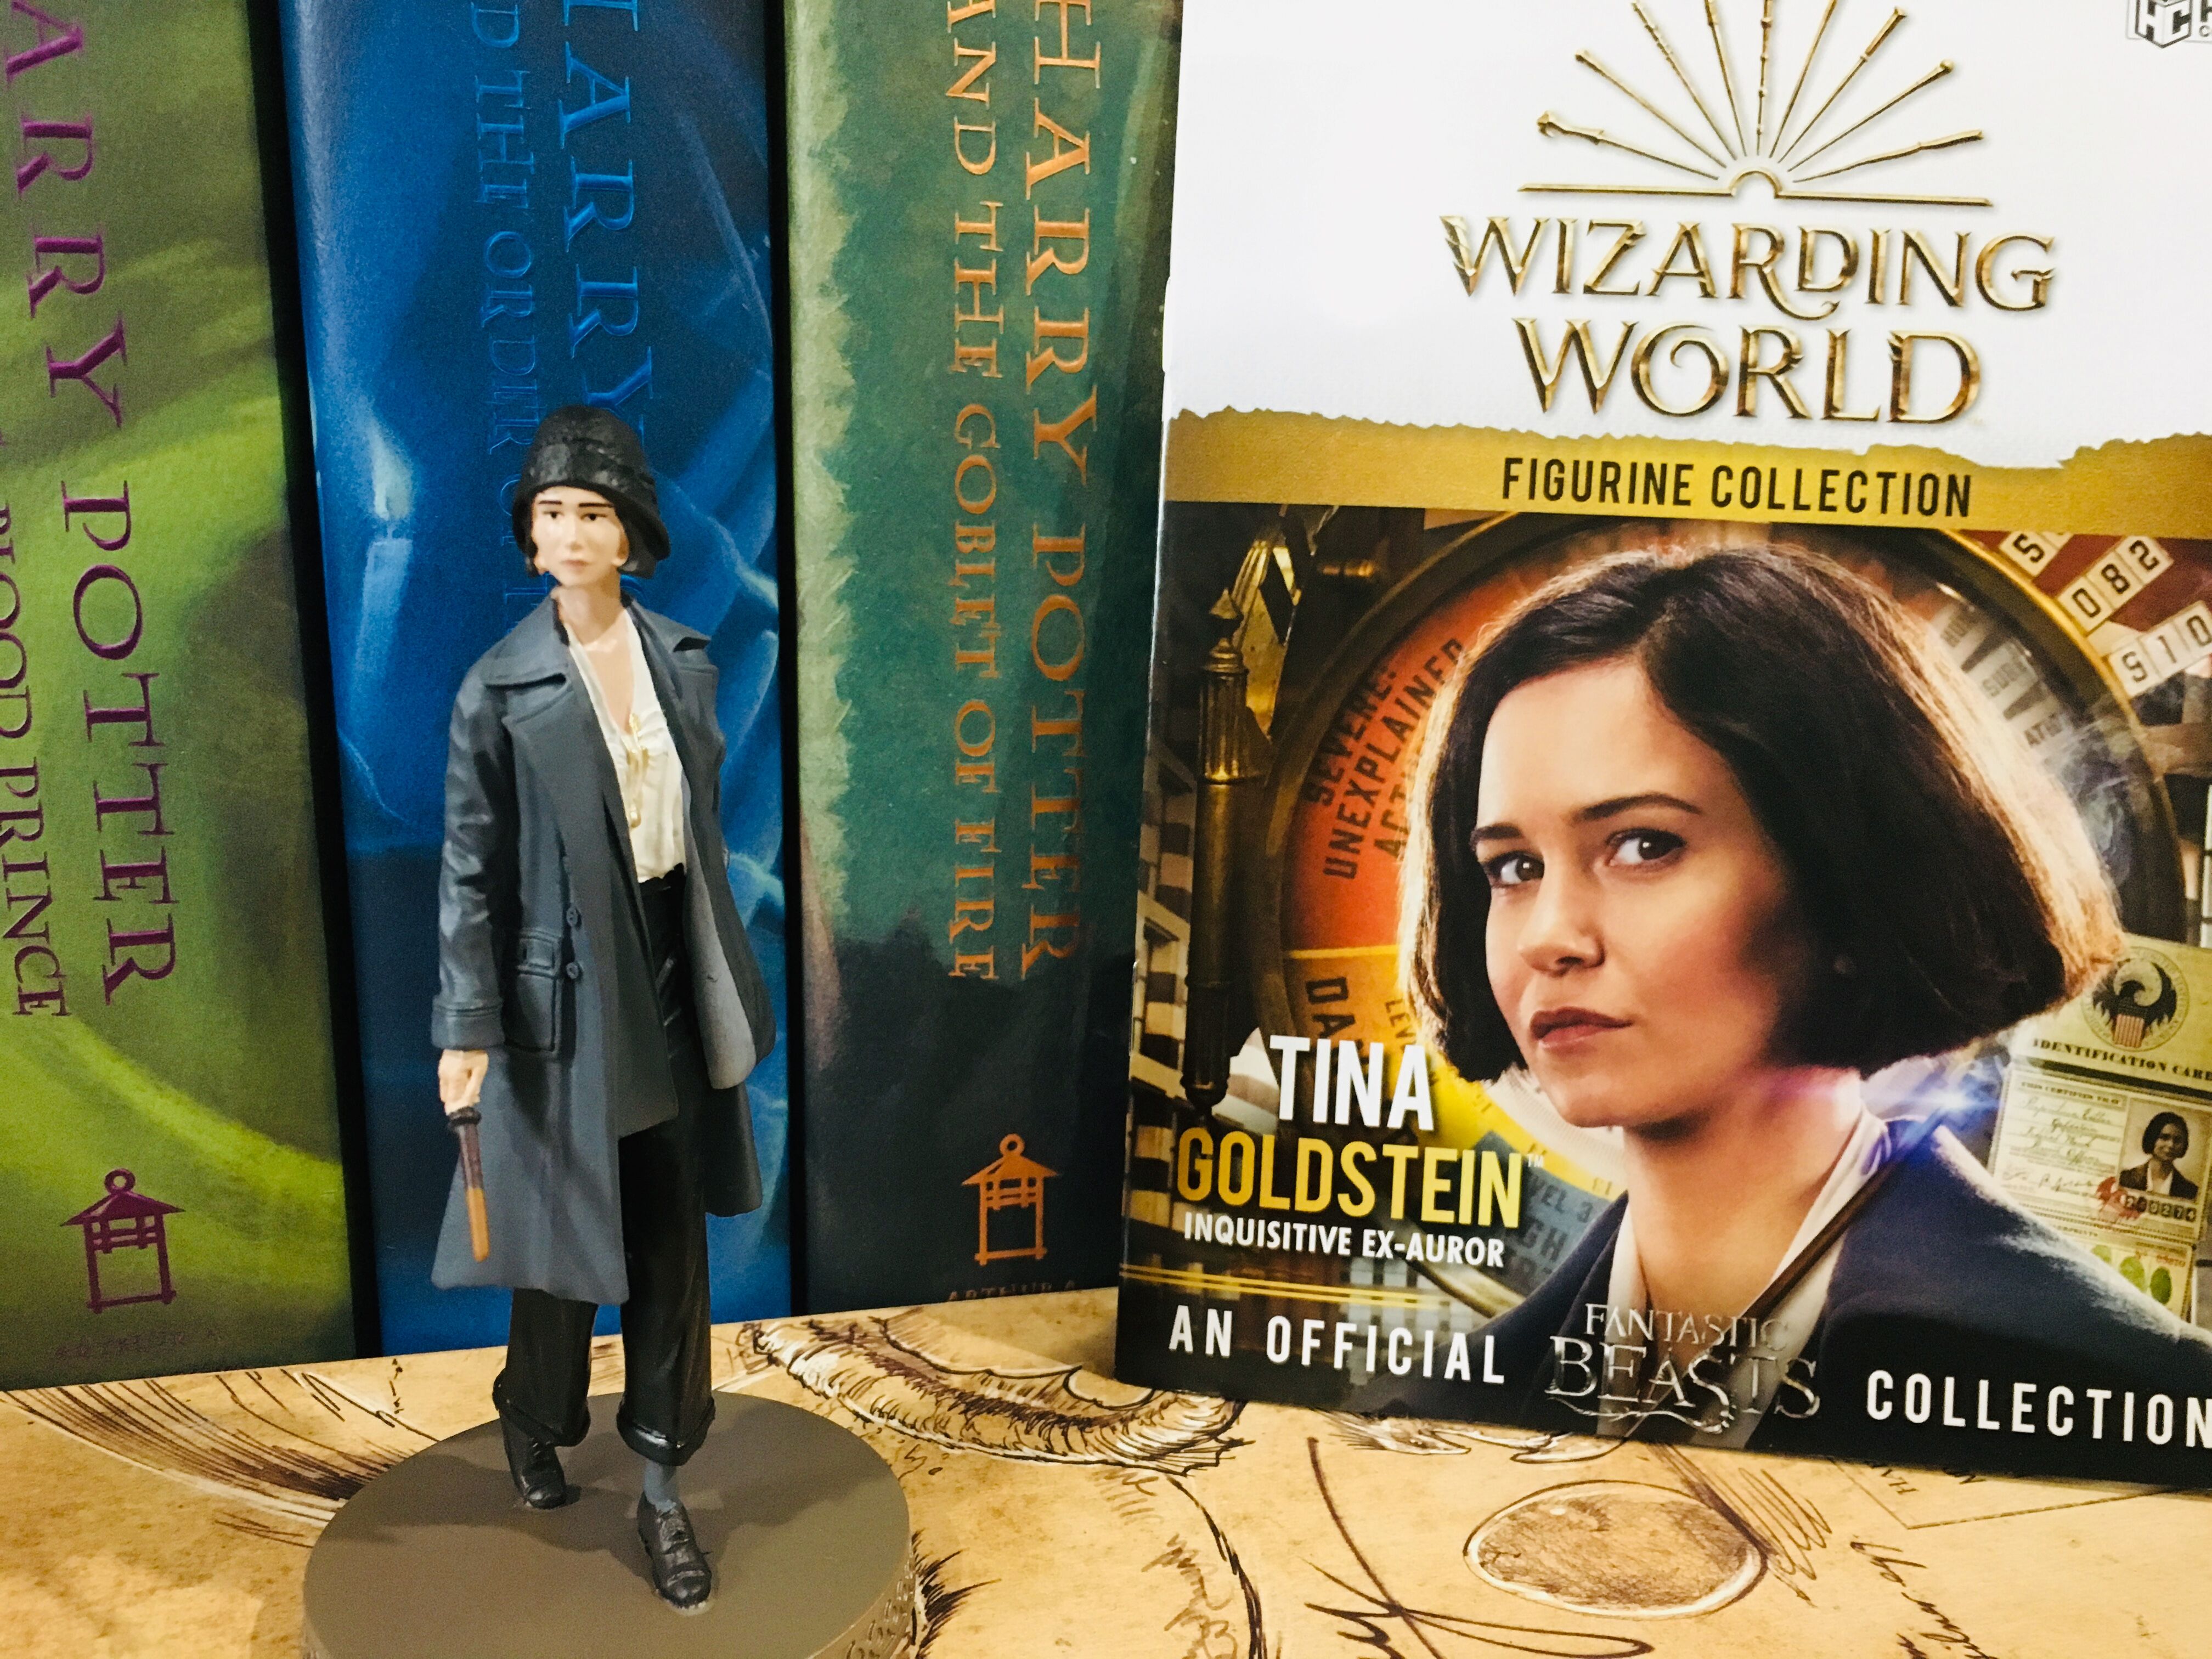 This figurine comes with an exclusive booklet full of information that tells you all about your new wizarding world figurine.